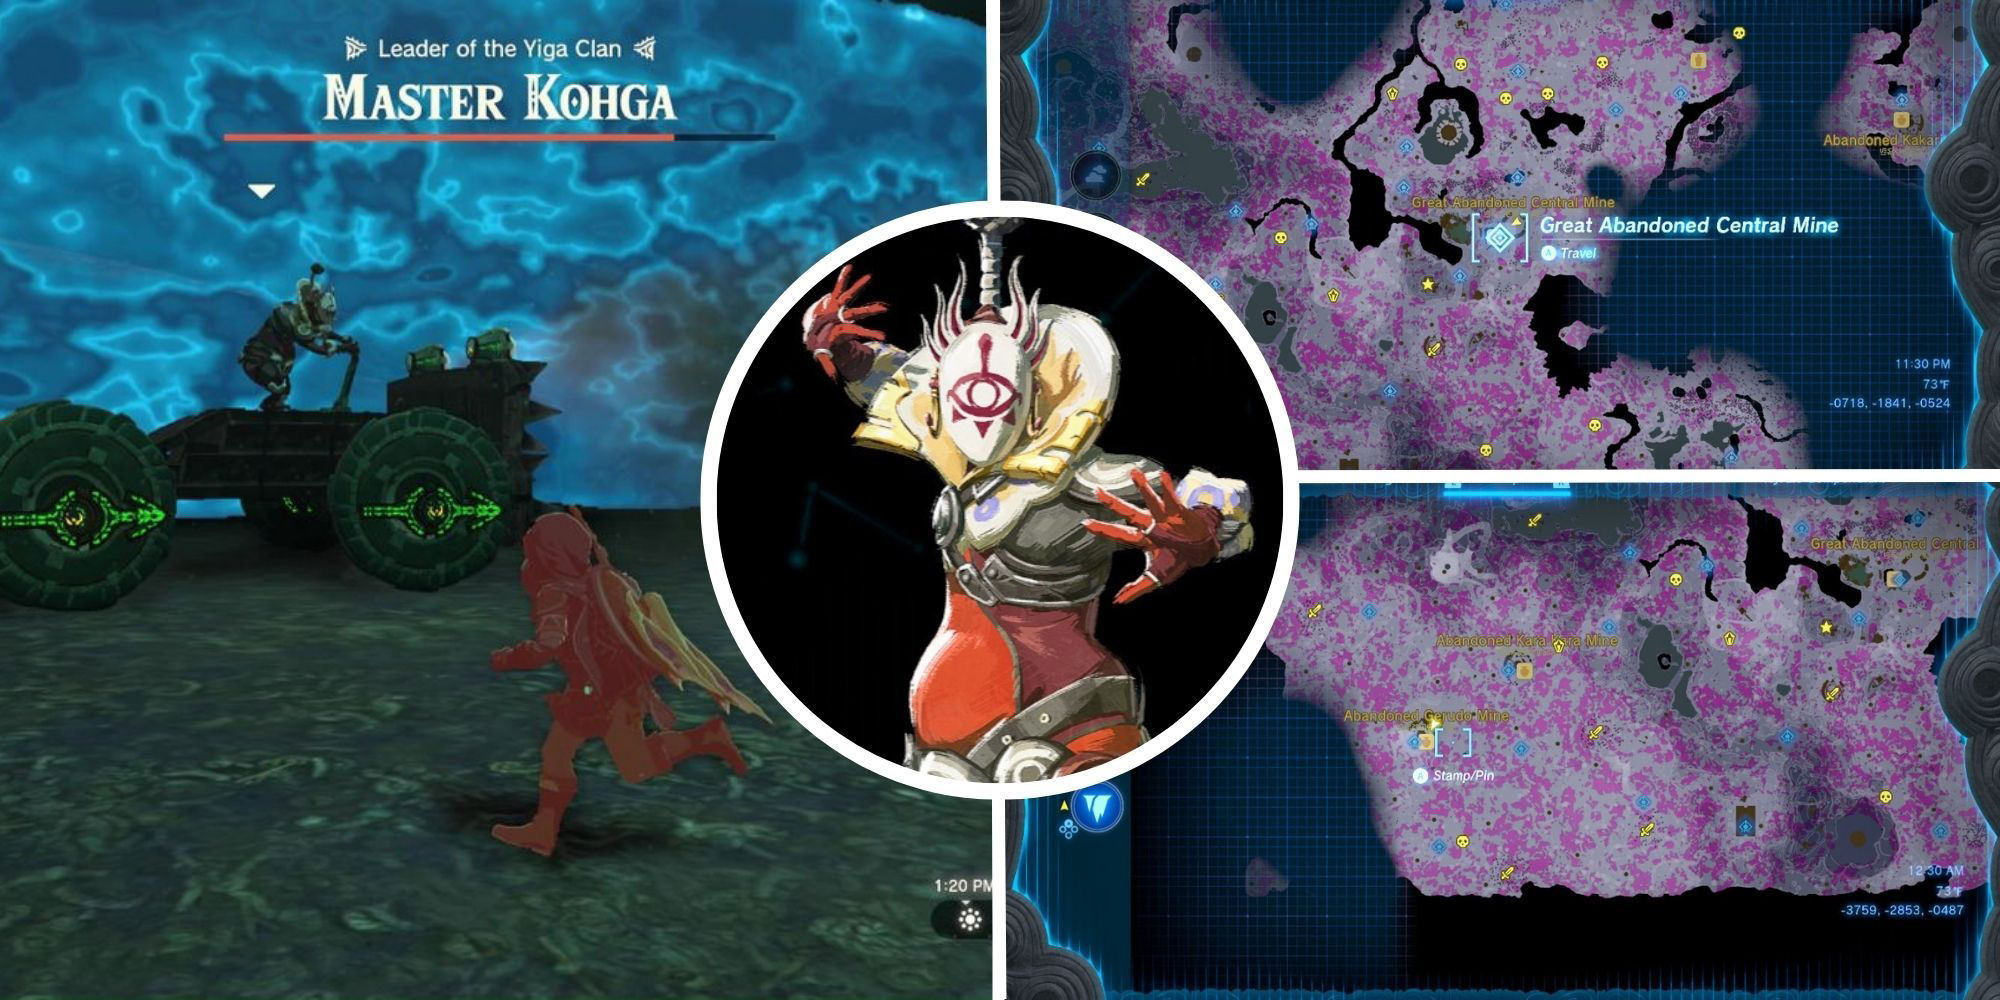 tears-of-the-kingdom-master-kohga-of-the-yiga-clan-quest-guide